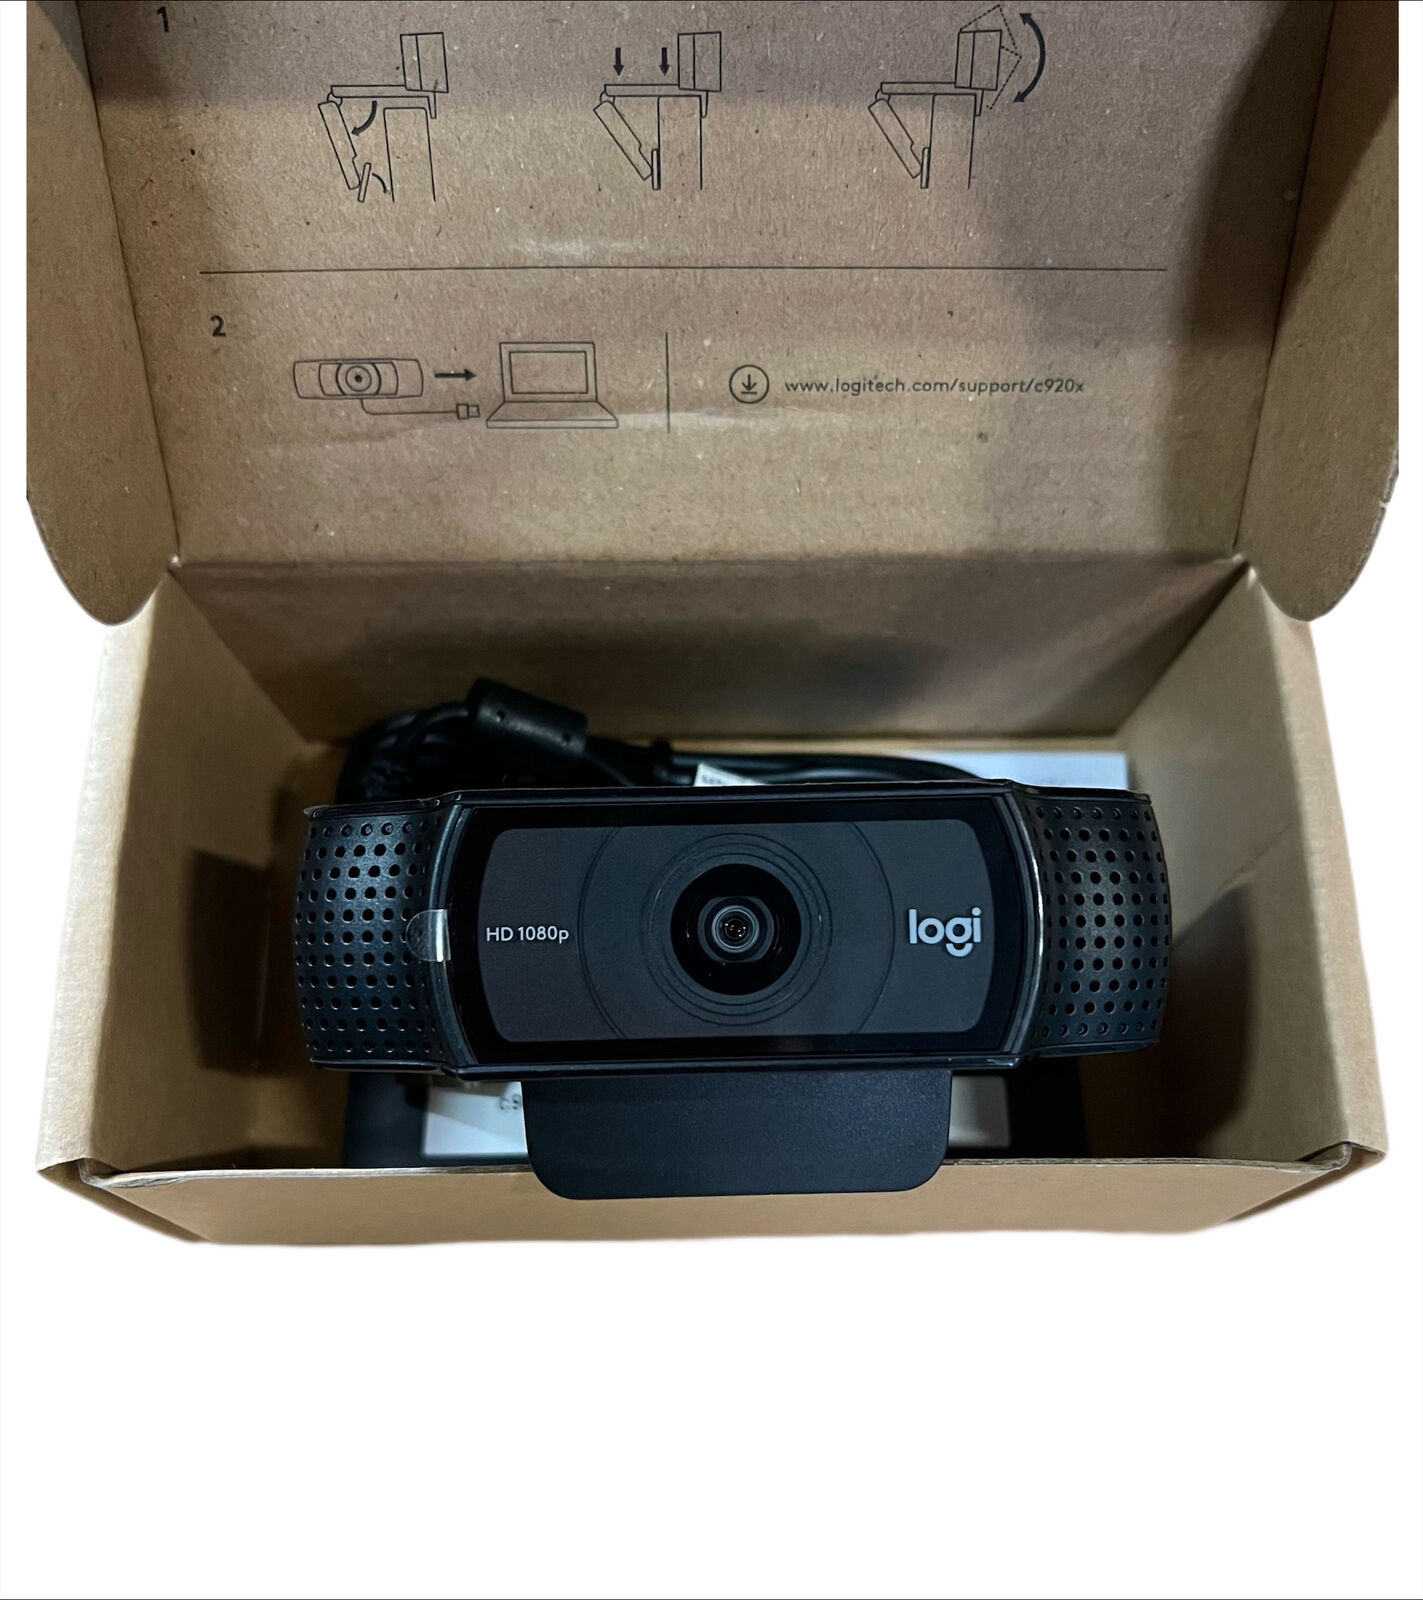 Logitech C920x HD 1080p Mic-Enabled Webcam, Certified for Zoom, MS Compatible